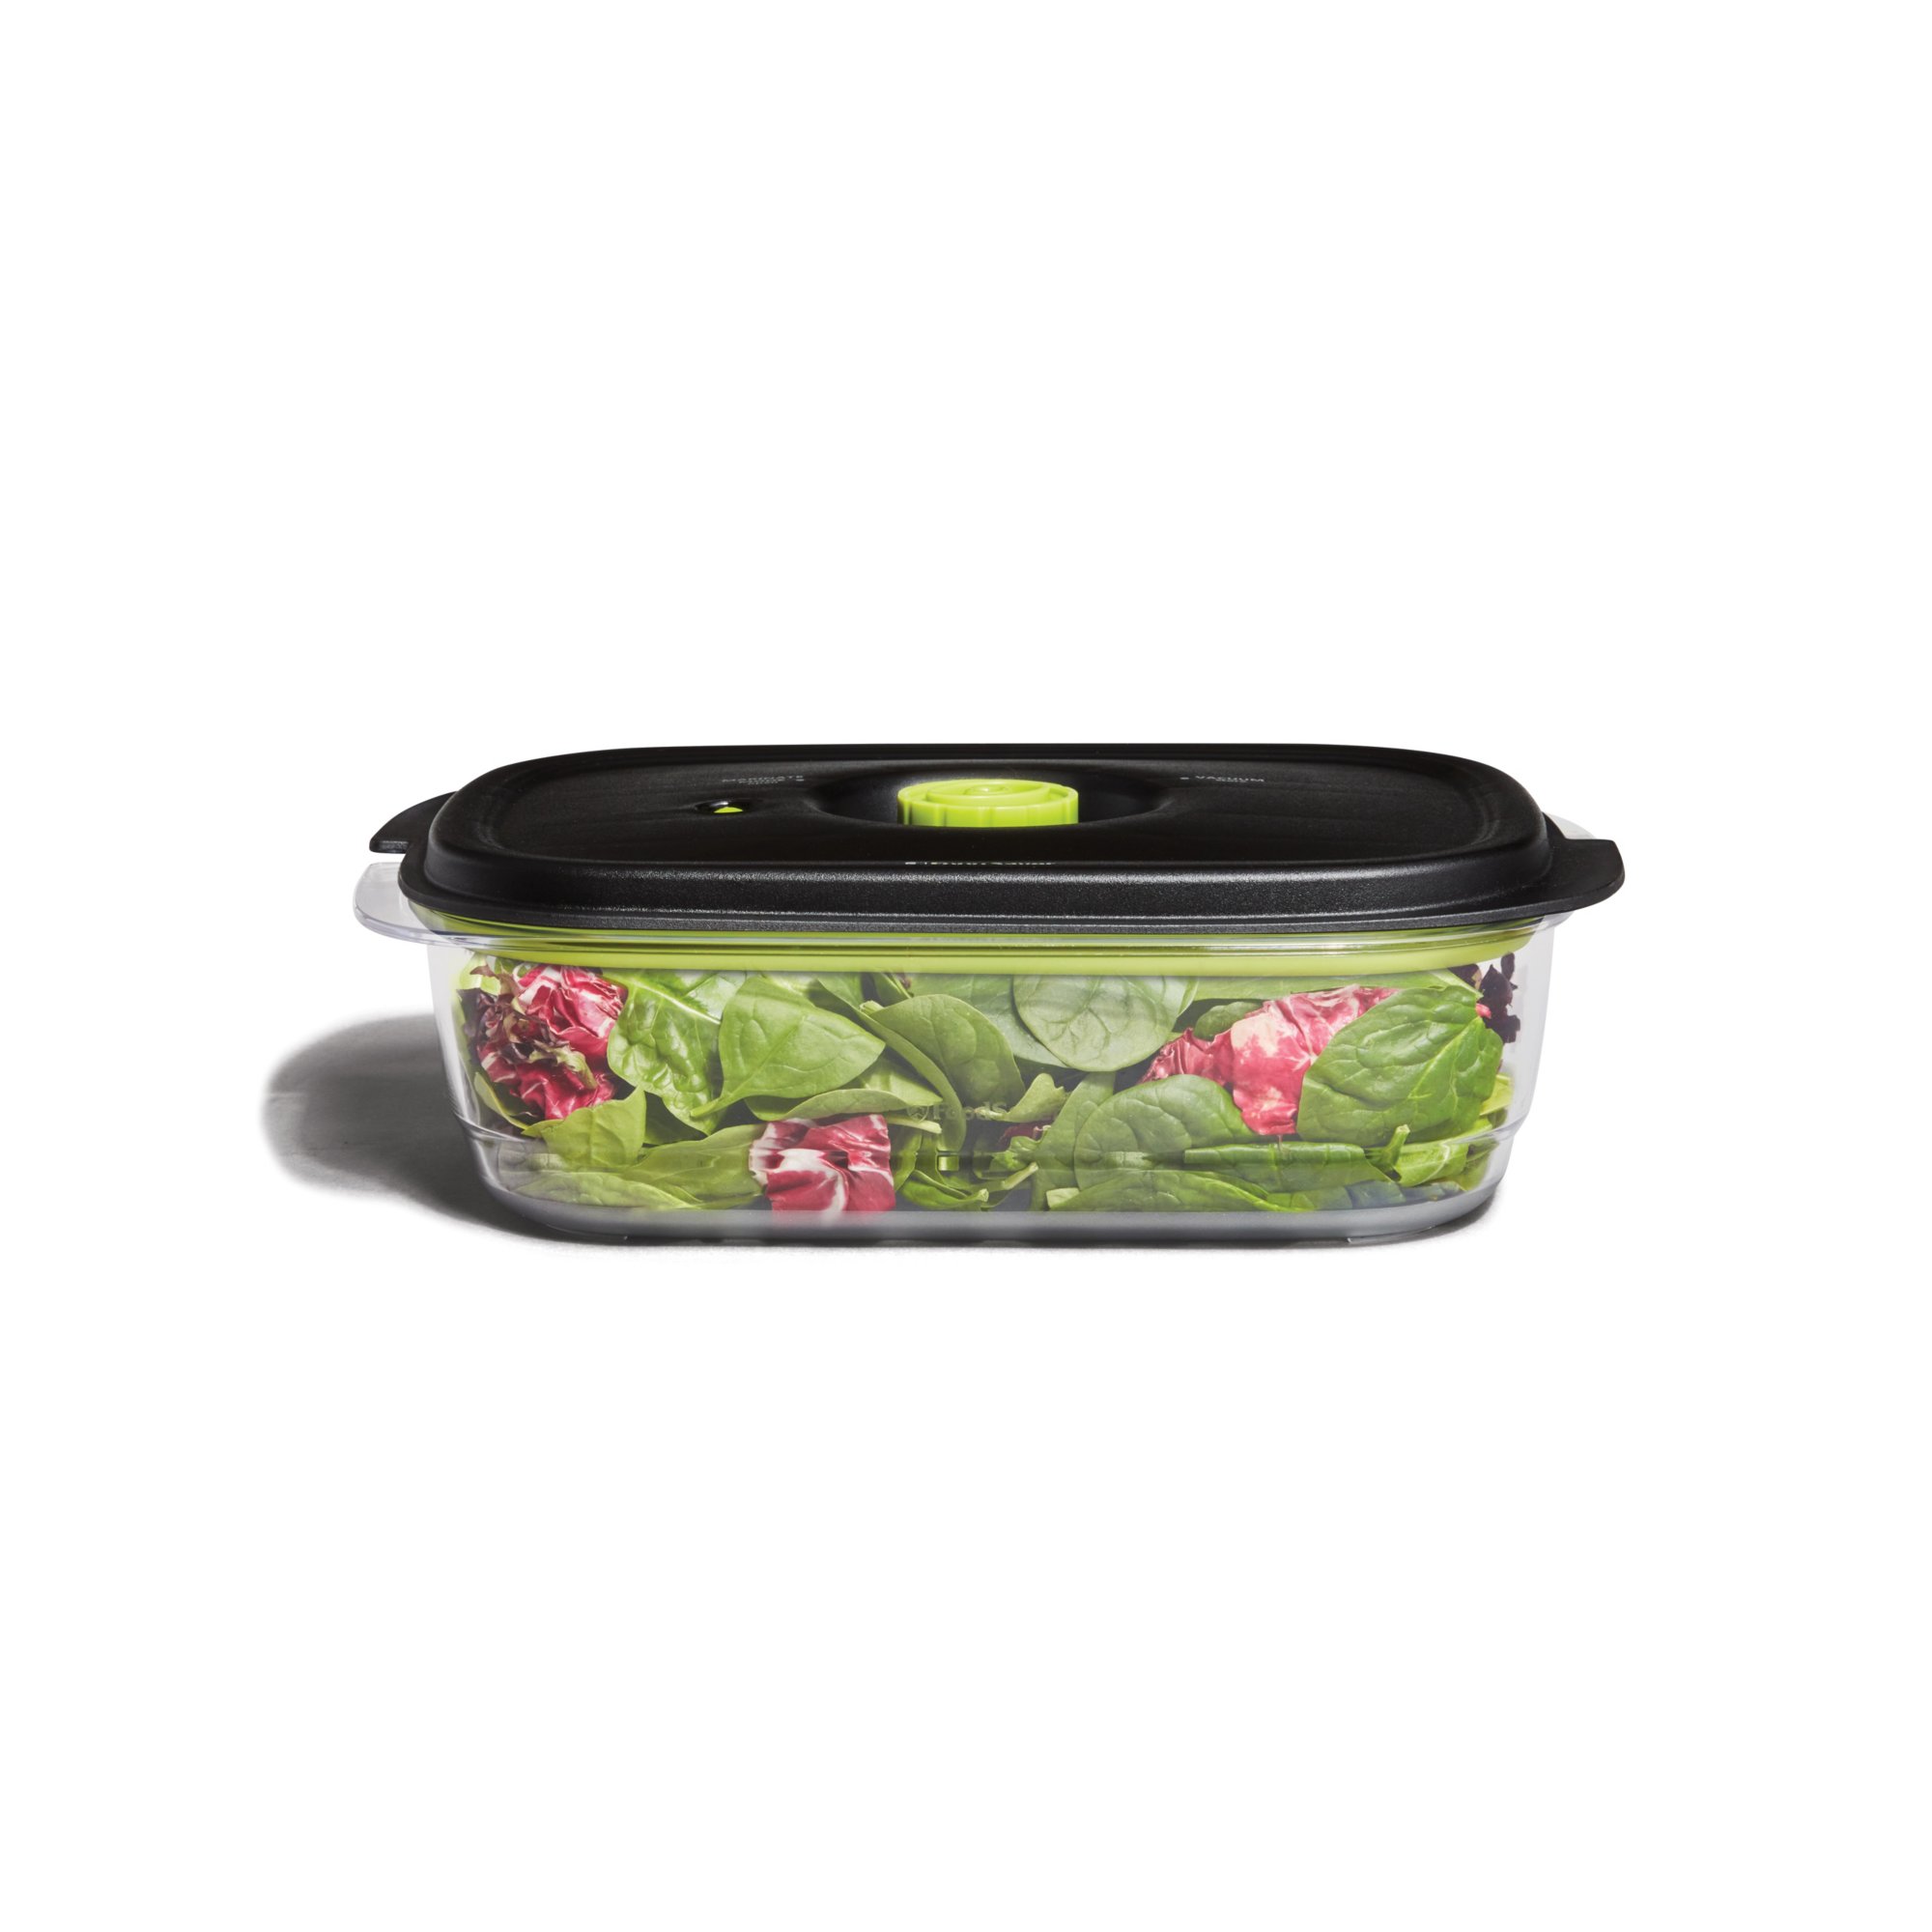 https://newellbrands.scene7.com/is/image/NewellRubbermaid/SAP-foodsaver-10c-container-with-food-straight-on_White?wid=2000&hei=2000